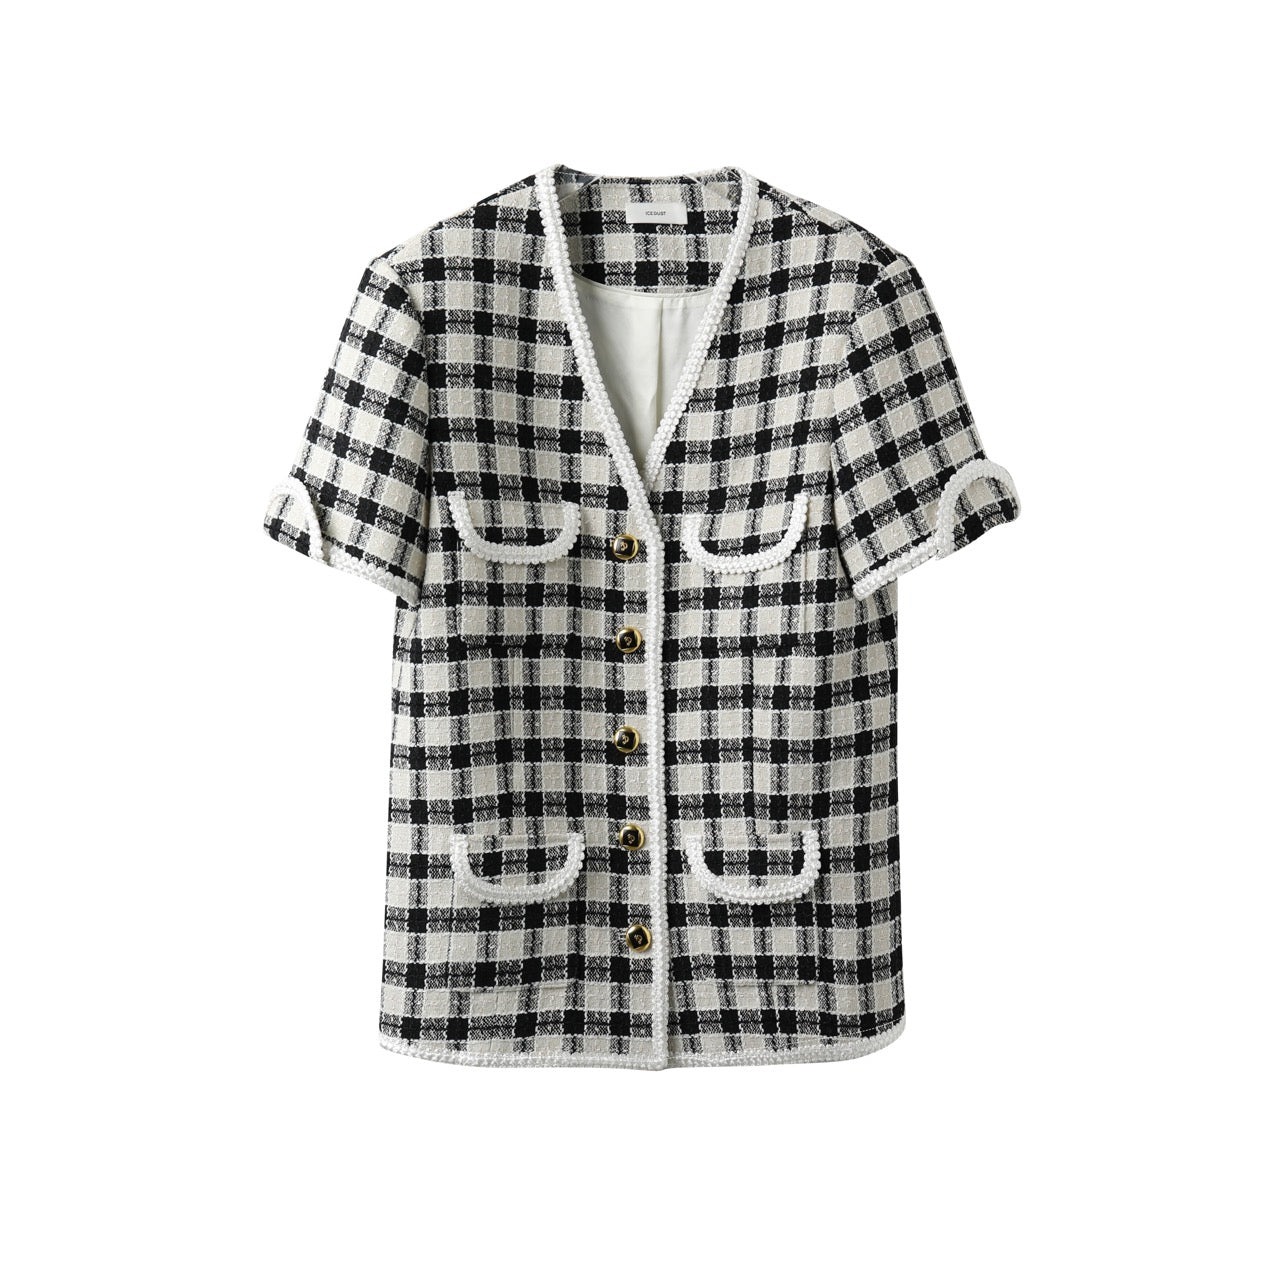 ICE DUST ICE DUST V Neck Stitched Dress Black And White Checkered | MADA IN CHINA